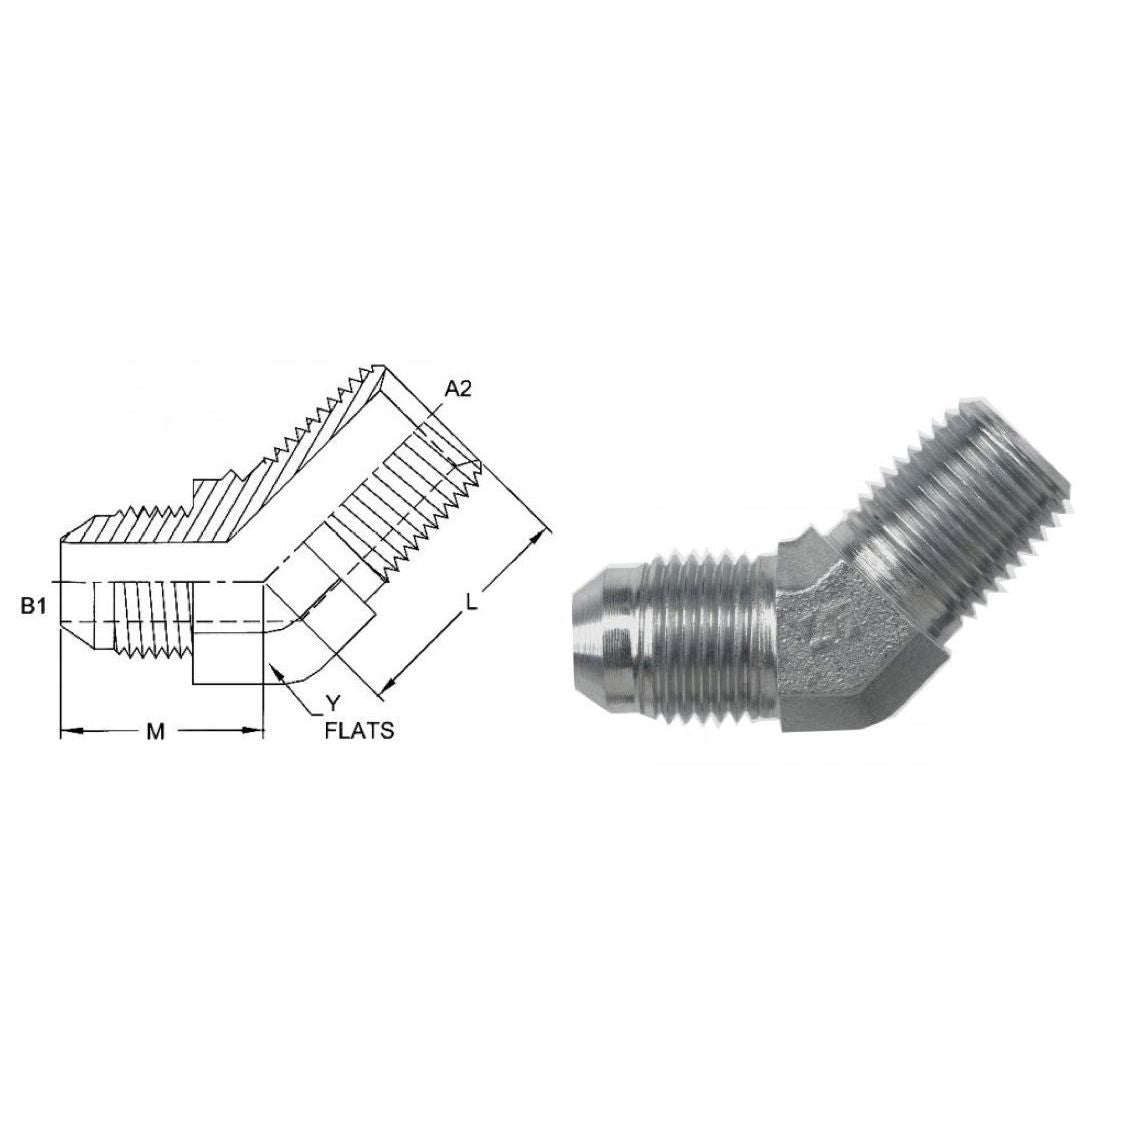 2503-03-02-SS : OneHydraulics 45-Degree Elbow, 0.1875 (3/16) Male JIC x 0.125 (1/8) Male NPT, Stainless Steel, 7200psi